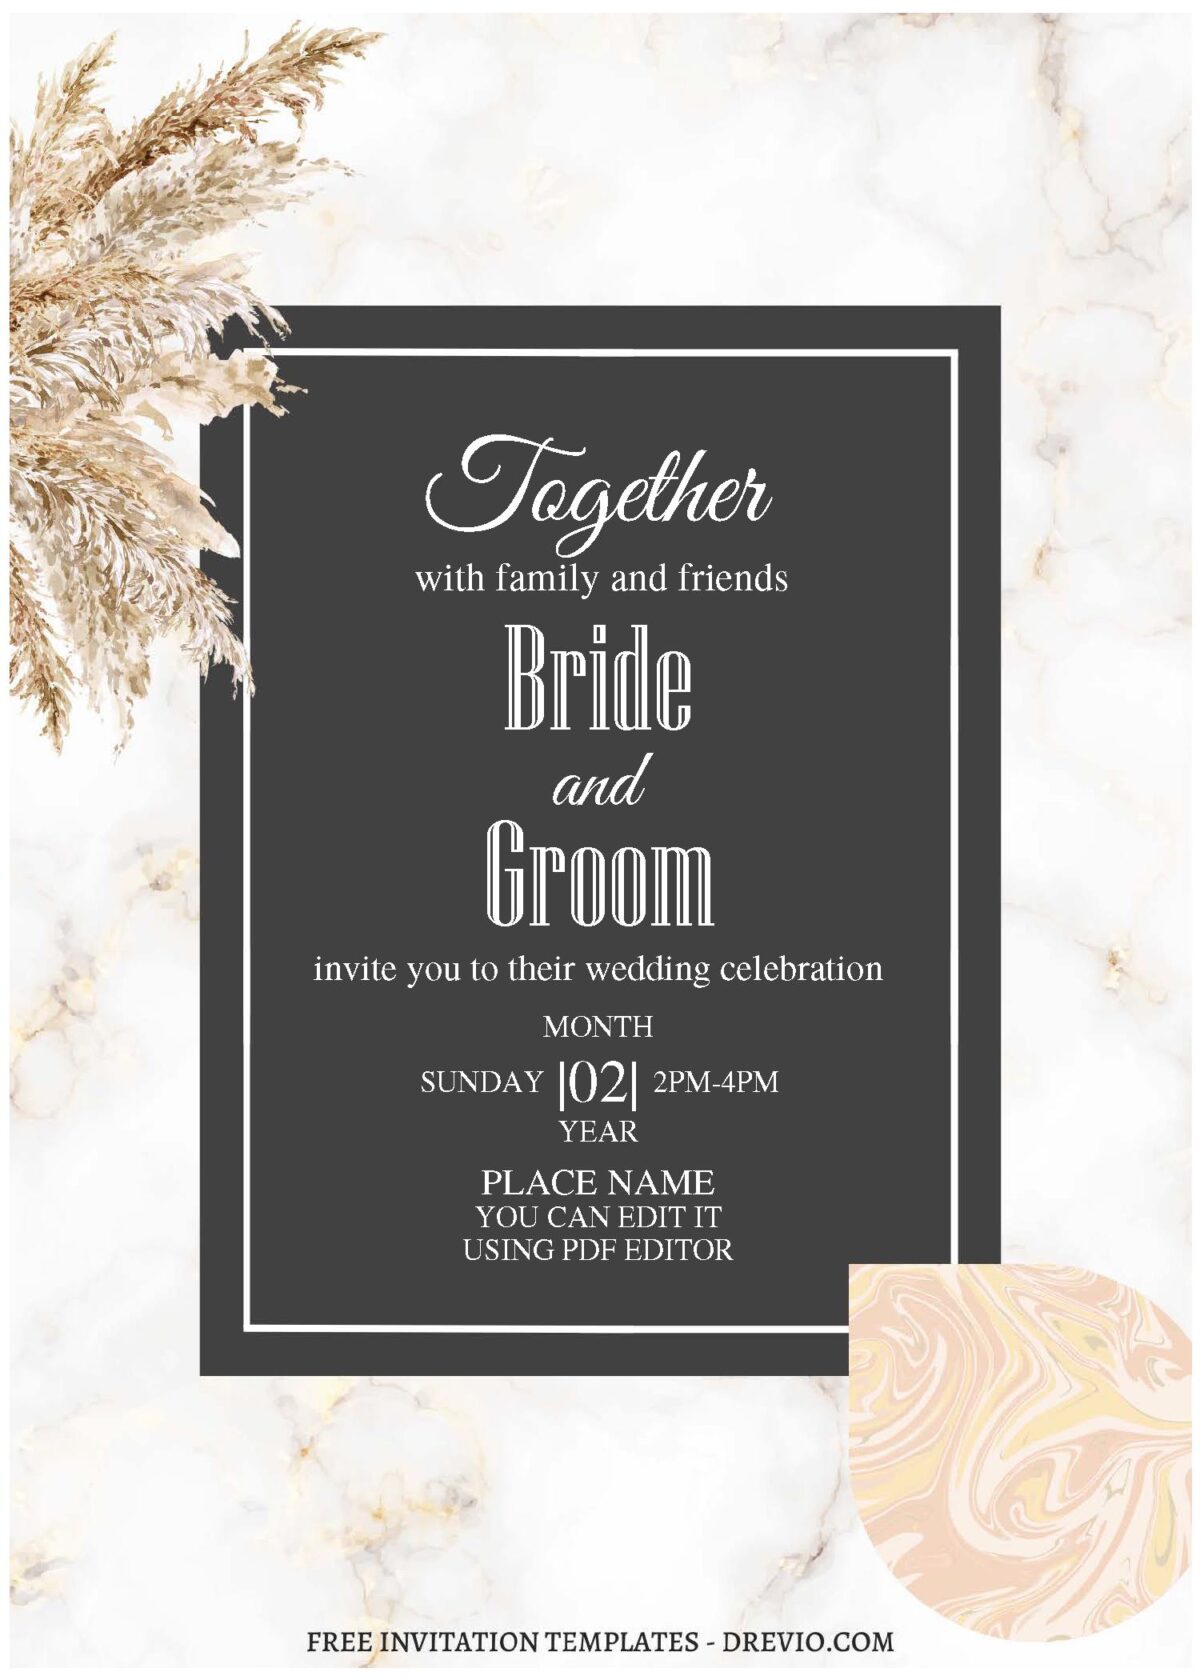 (Free Editable PDF) Fancy Rustic Pampas Wedding Invitation Templates  with rustic watercolor greenery pampas grass